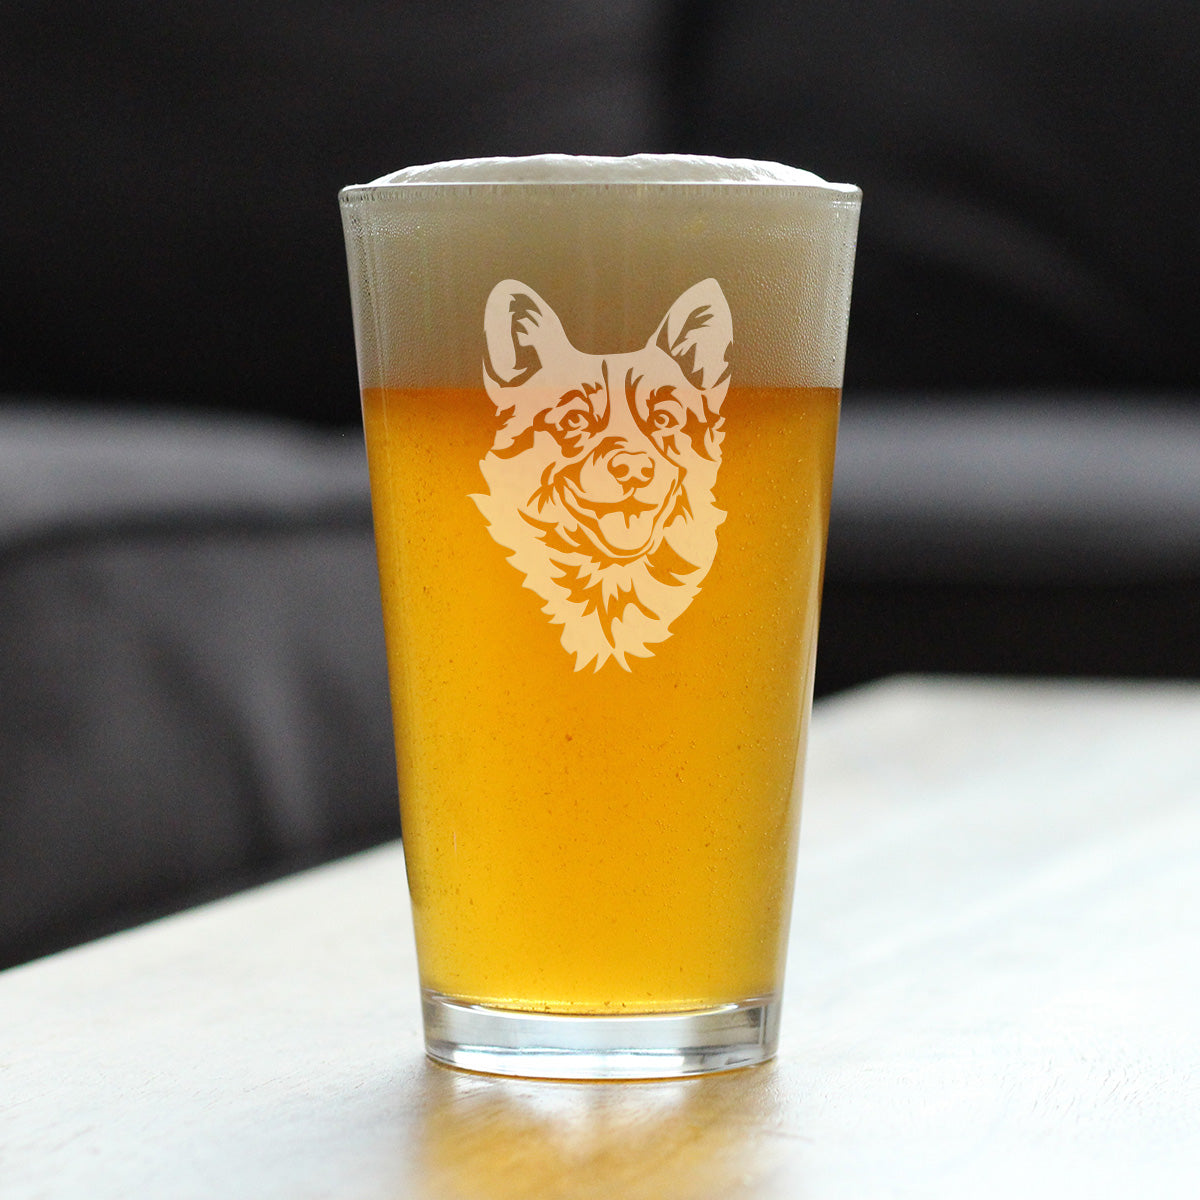 Corgi Face Pint Glass for Beer - Unique Dog Themed Decor and Gifts for Moms &amp; Dads of Welsh Corgies- 16 Oz